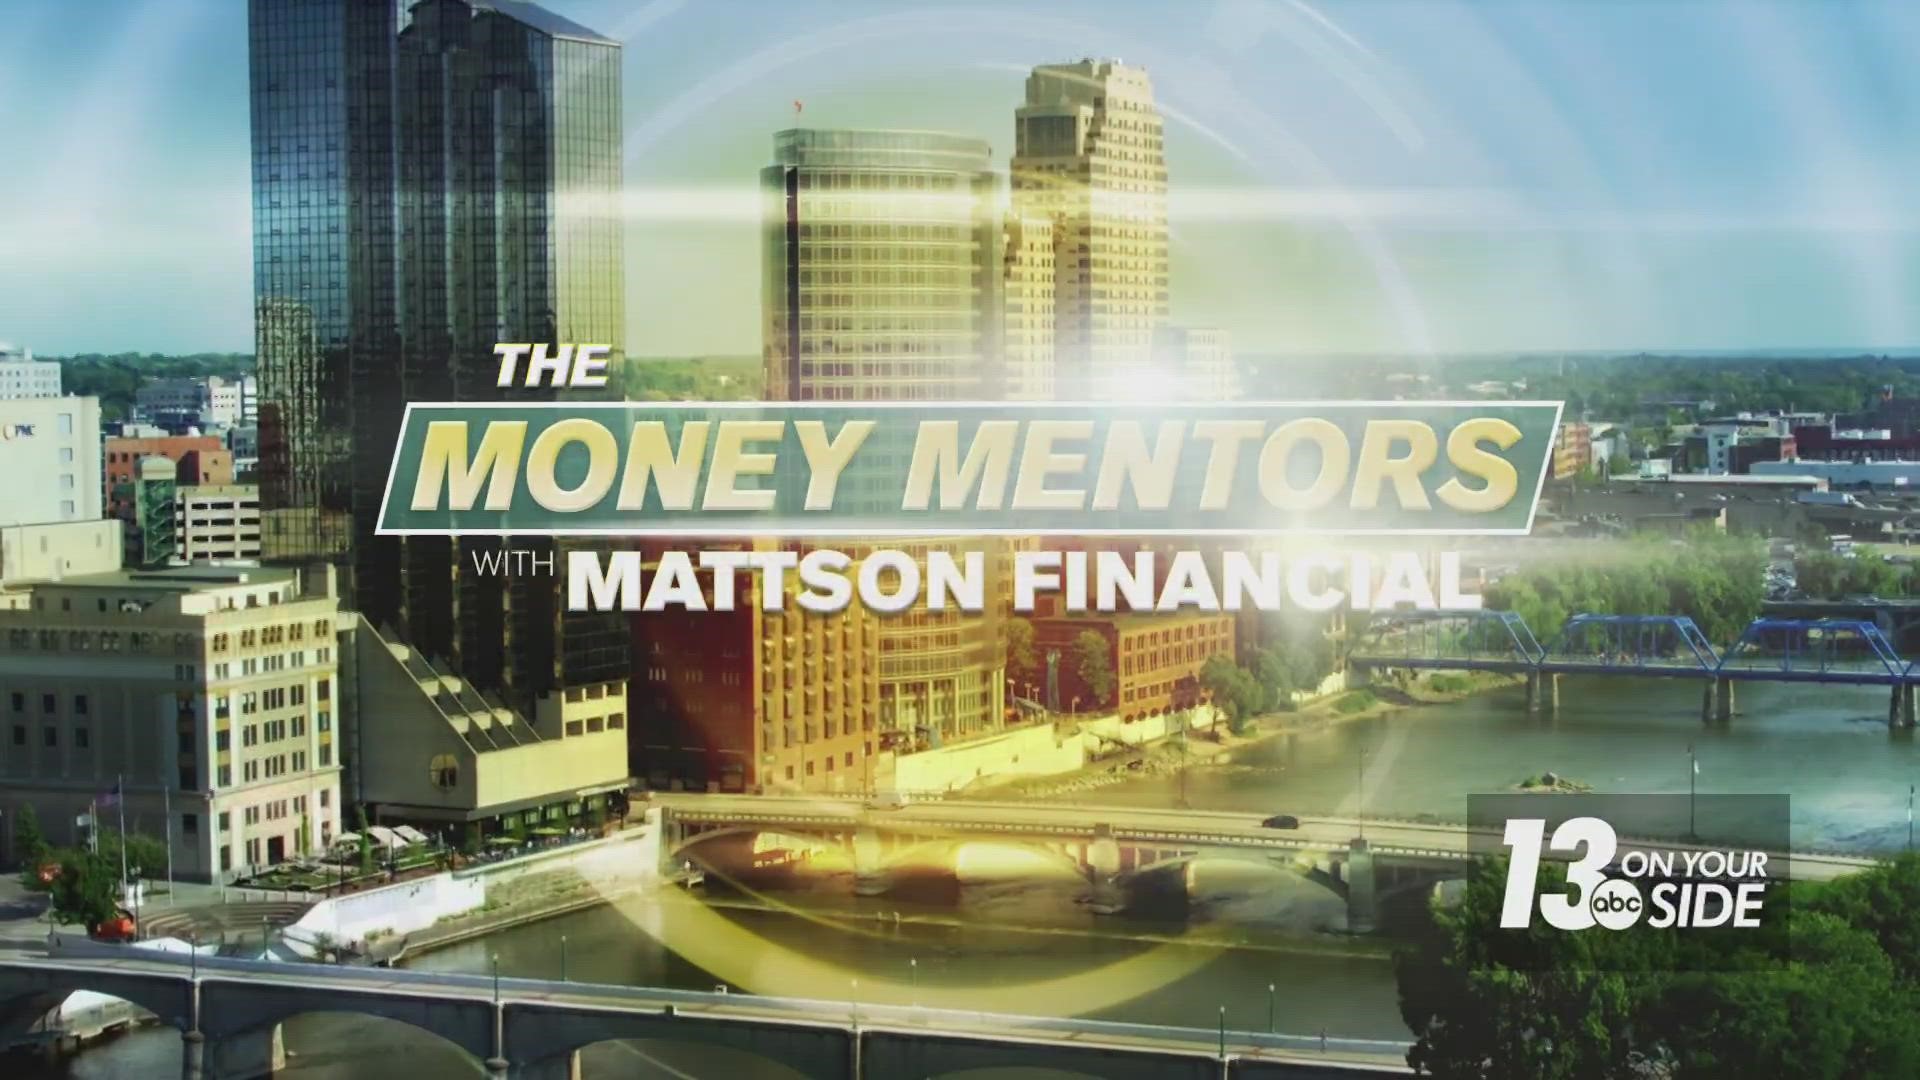 Gary Mattson and Taylor Steward are part of the family at Mattson Financial Services, a firm that’s been helping people retire successfully for decades.